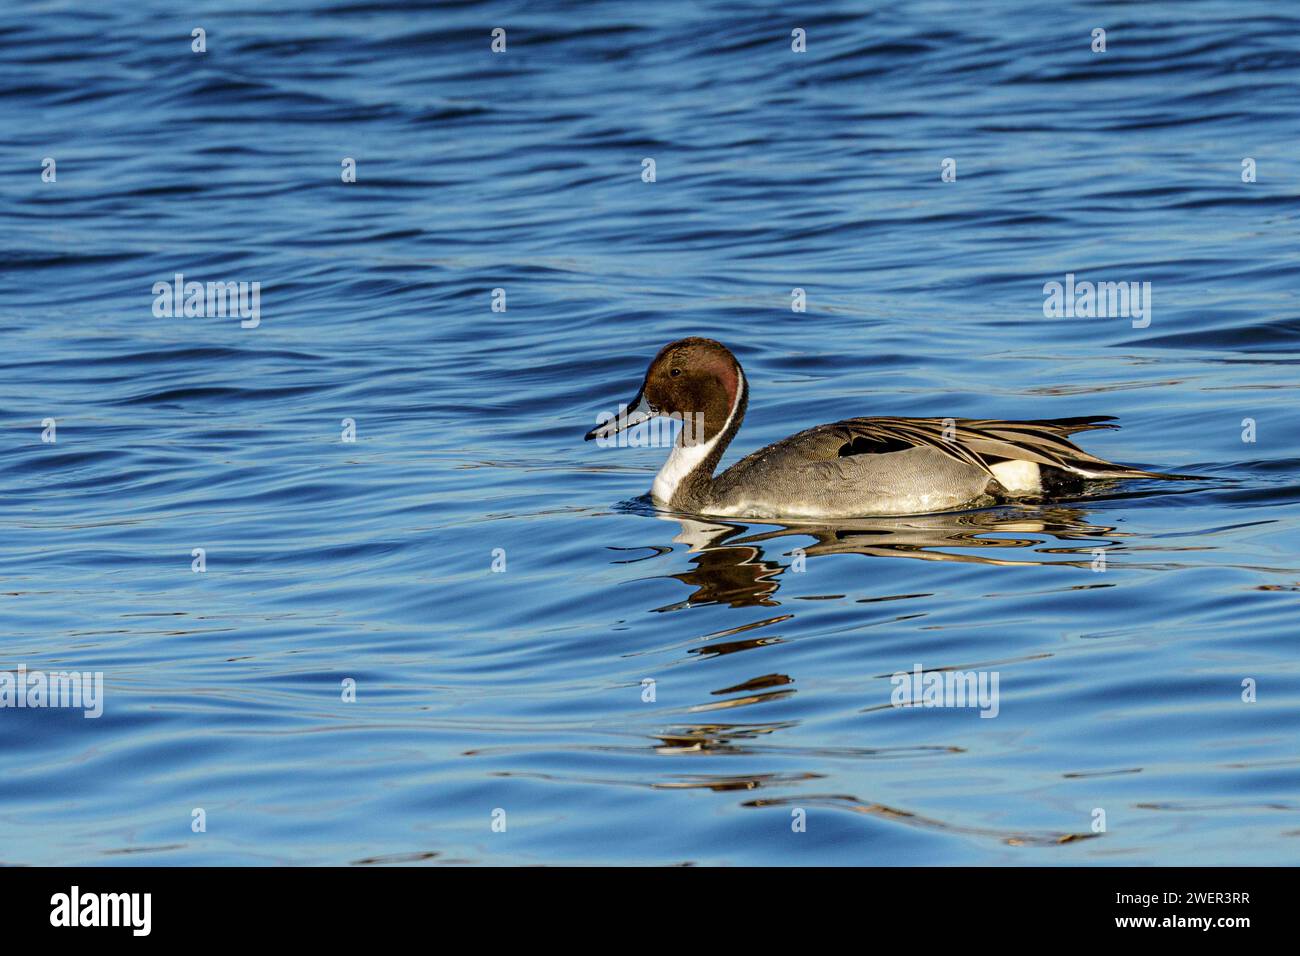 A serene duck afloat in calm blue waters, gazing curiously Stock Photo